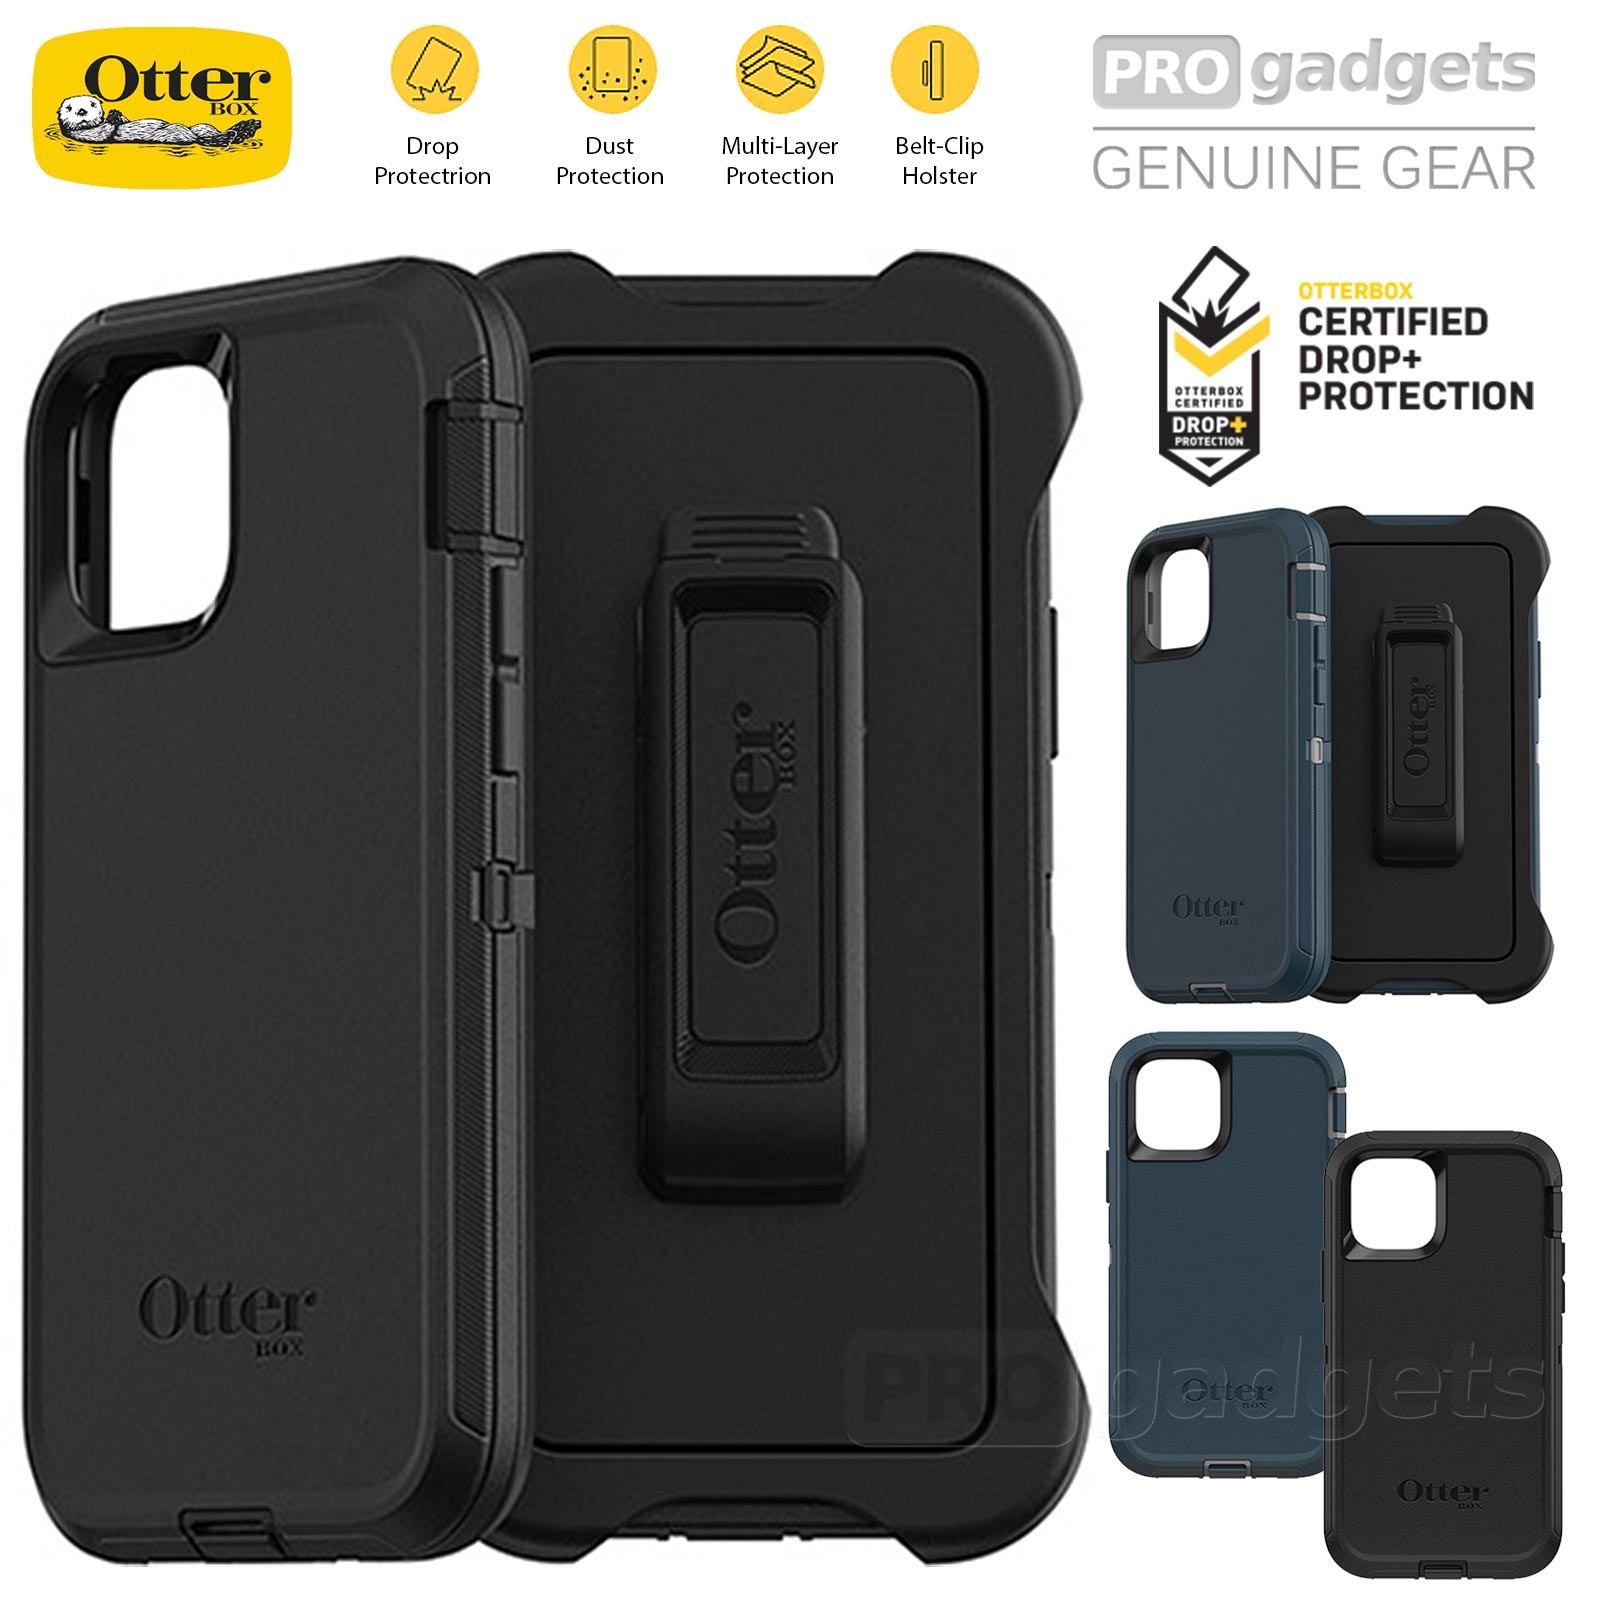 iPhone 11 Pro Max Case, Genuine OTTERBOX Defender Rugged Tough Hard